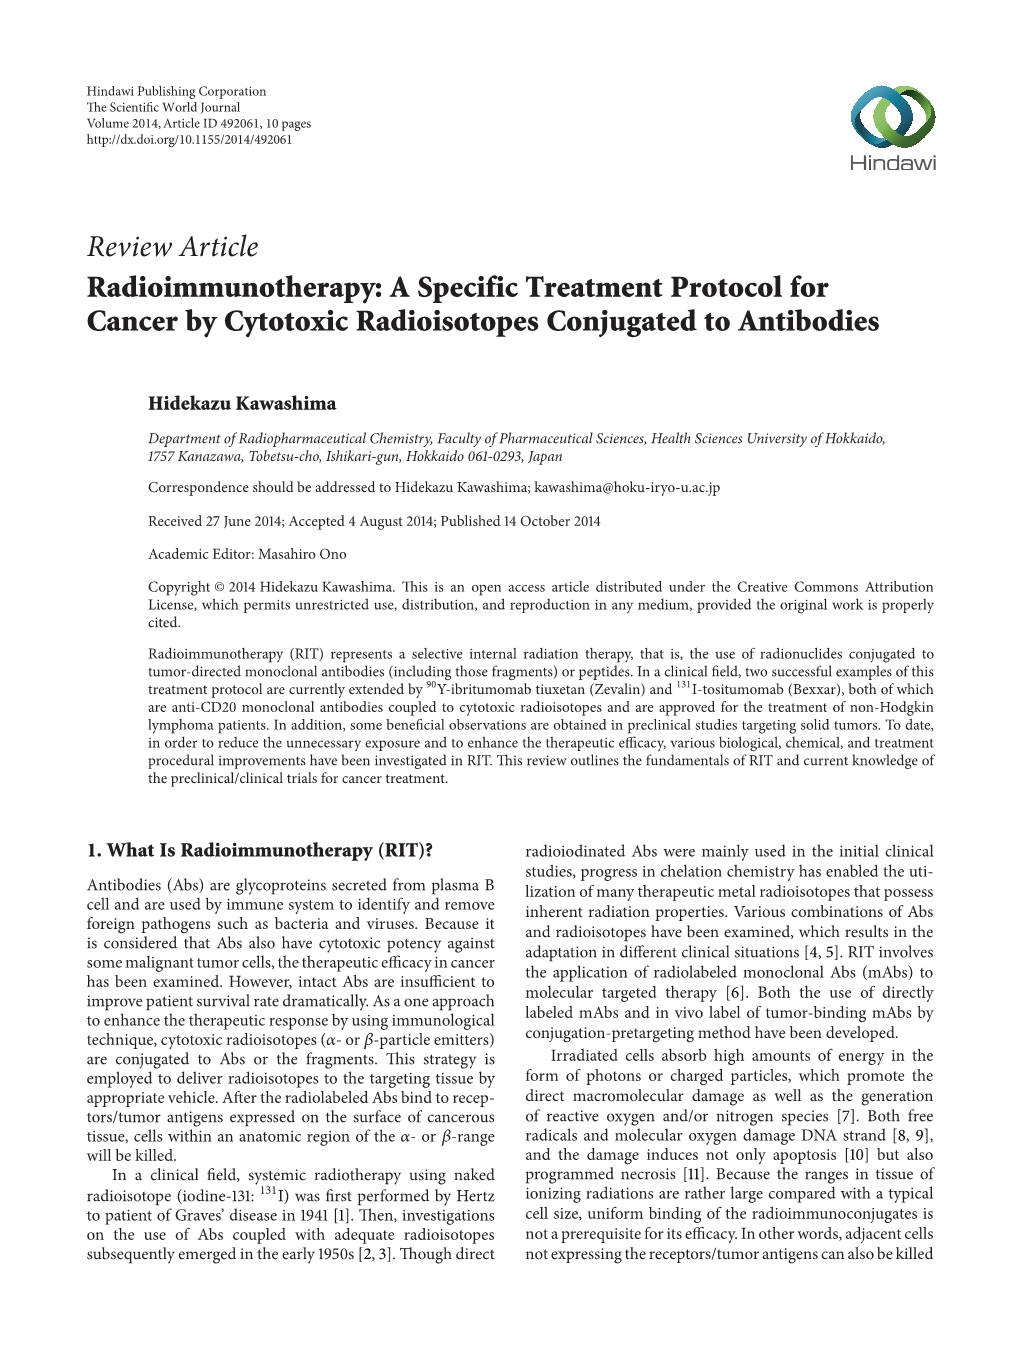 A Specific Treatment Protocol for Cancer by Cytotoxic Radioisotopes Conjugated to Antibodies